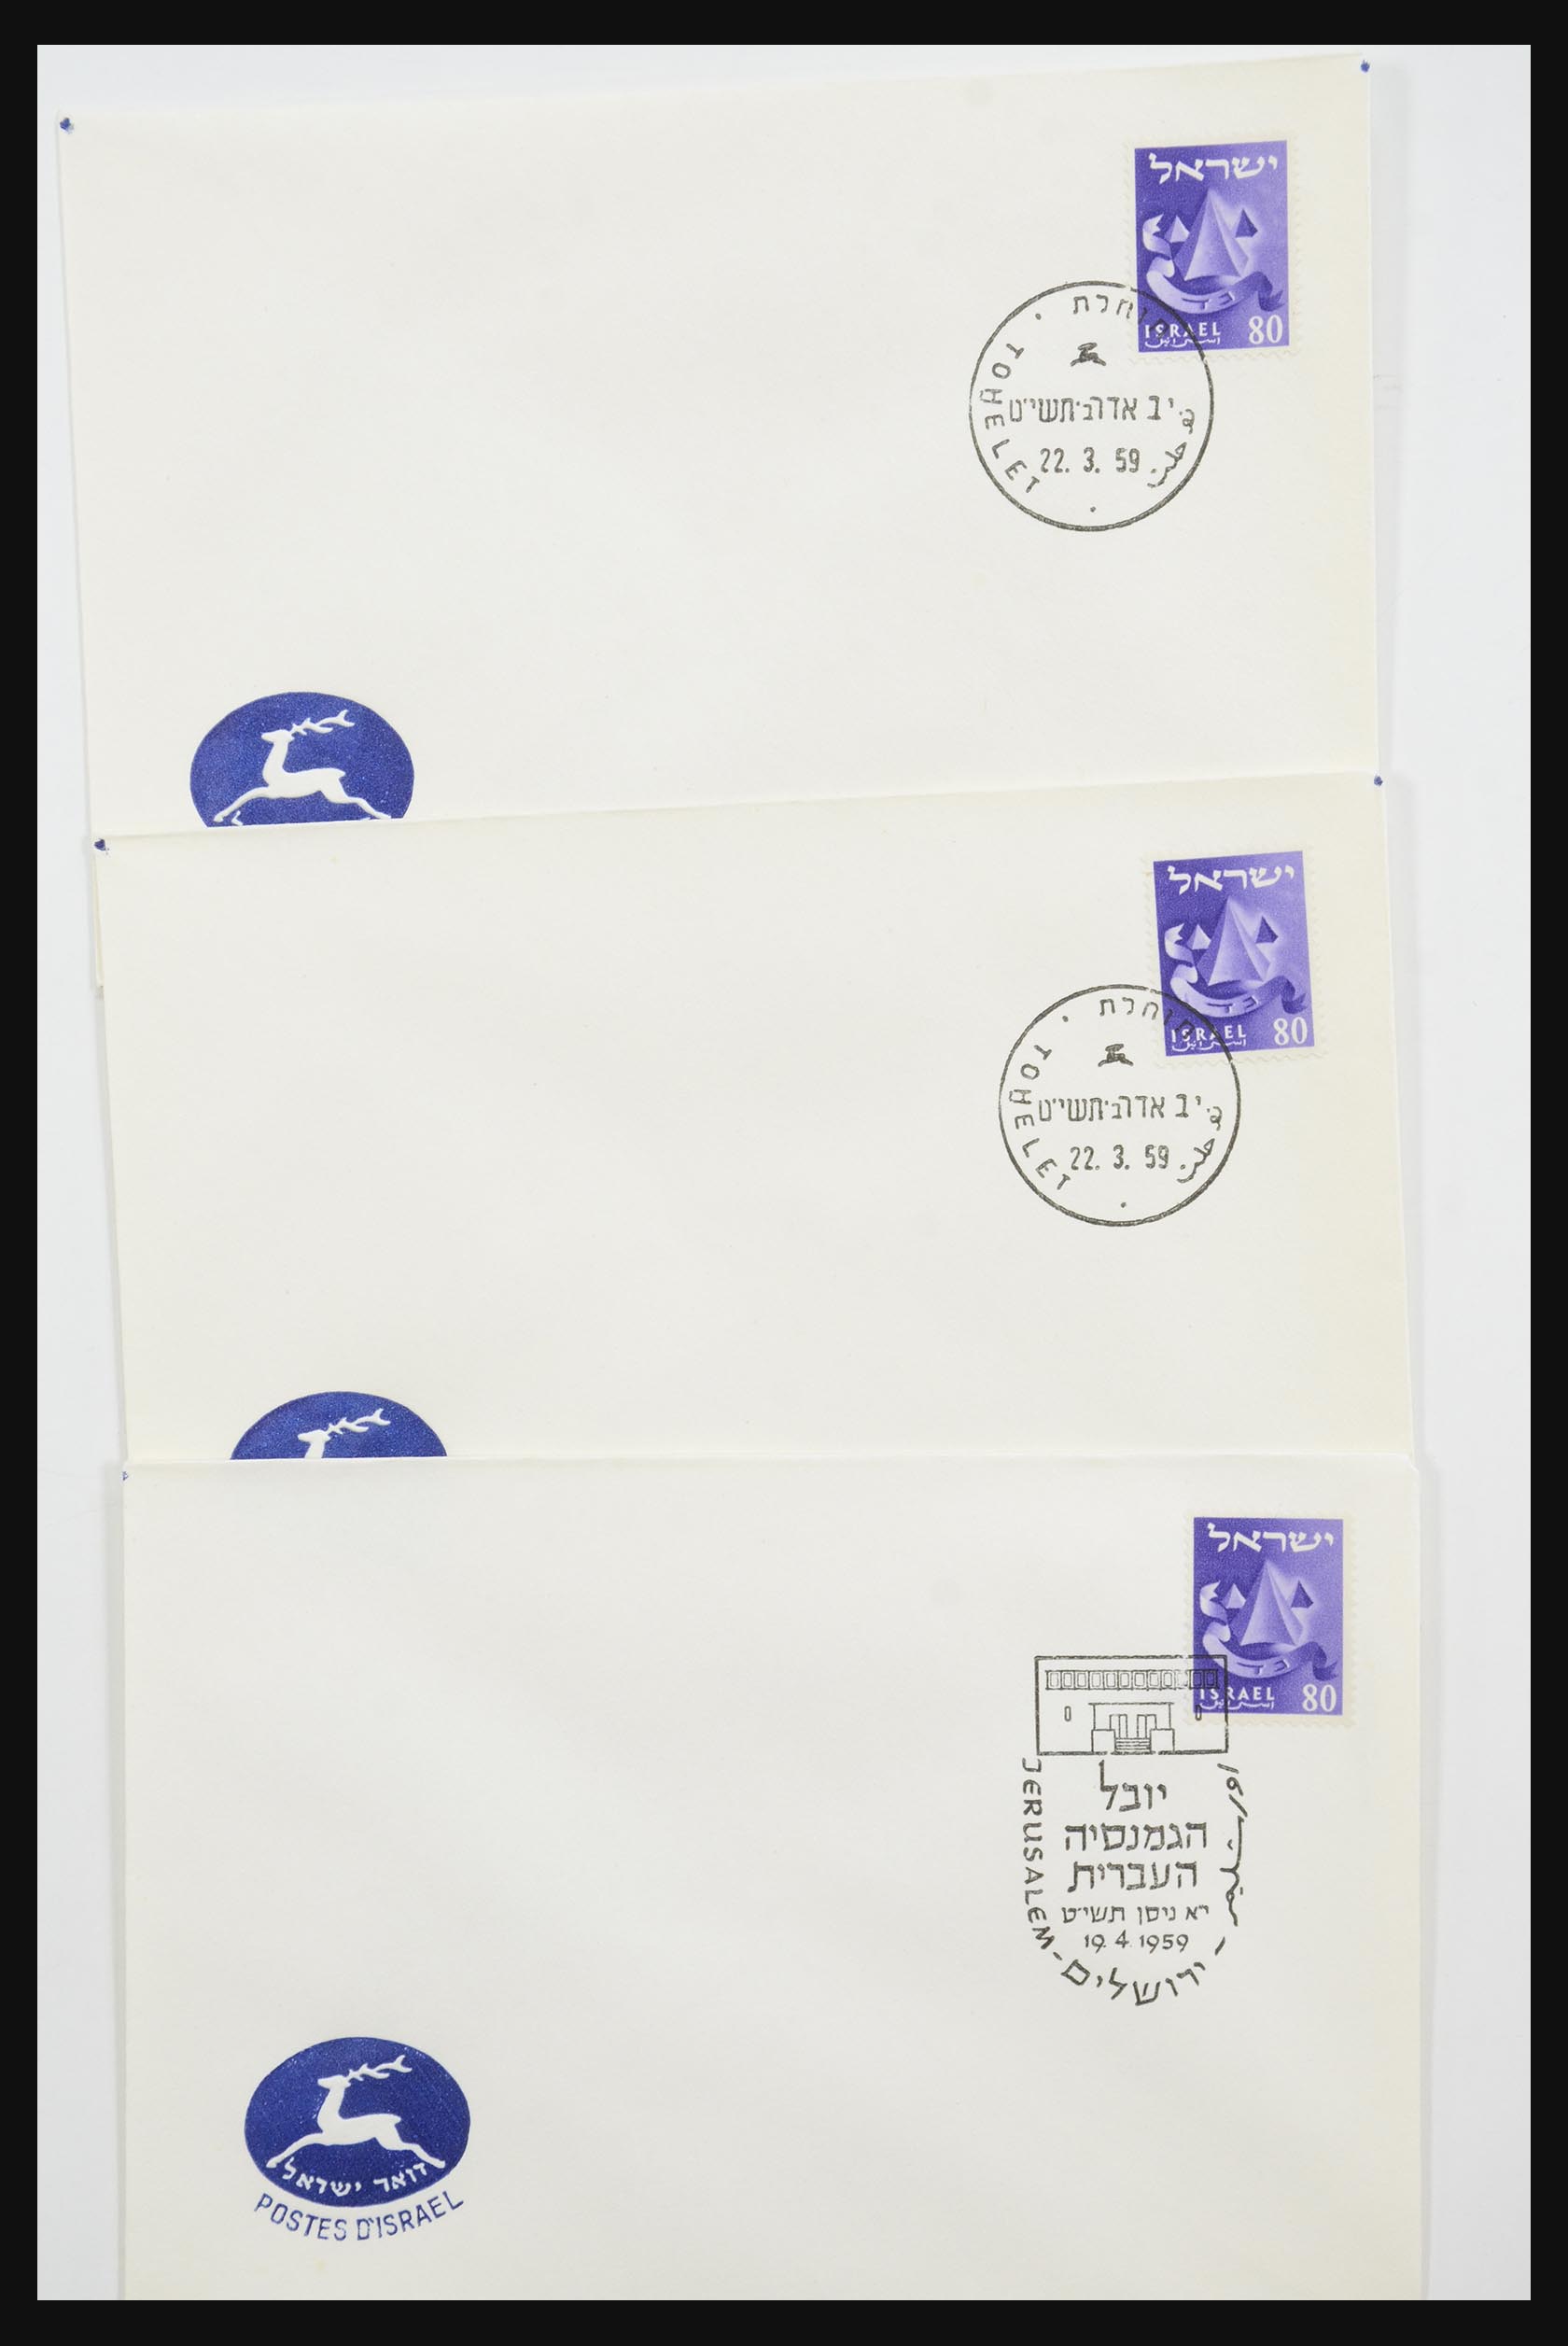 31924 020 - 31924 Israël fdc-collectie 1957-2003.